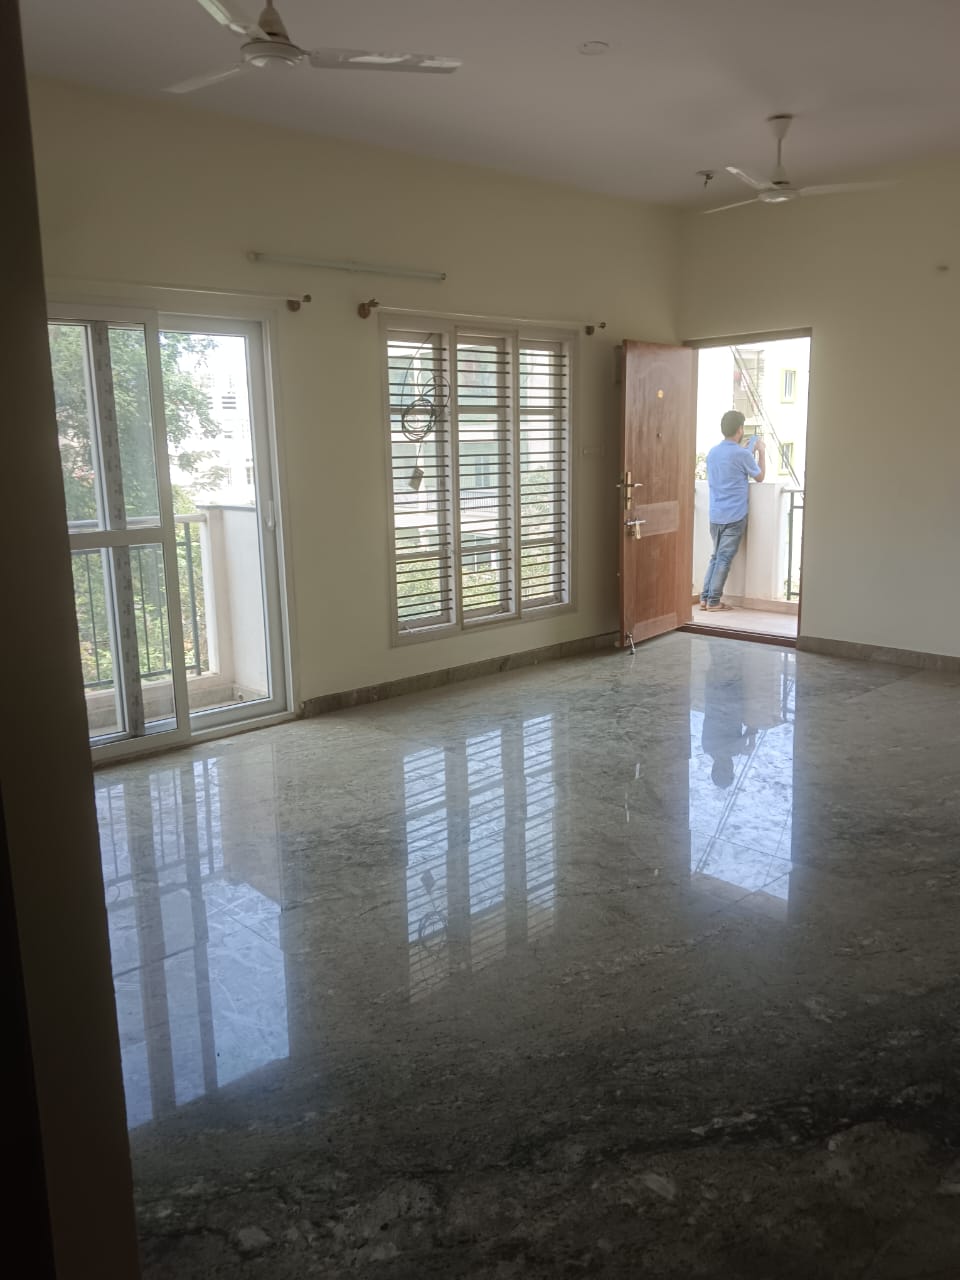 1 BHK Independent House for Lease Only at JAML2 - 4997 - 12 Lakhs in Vivekananda Nagar